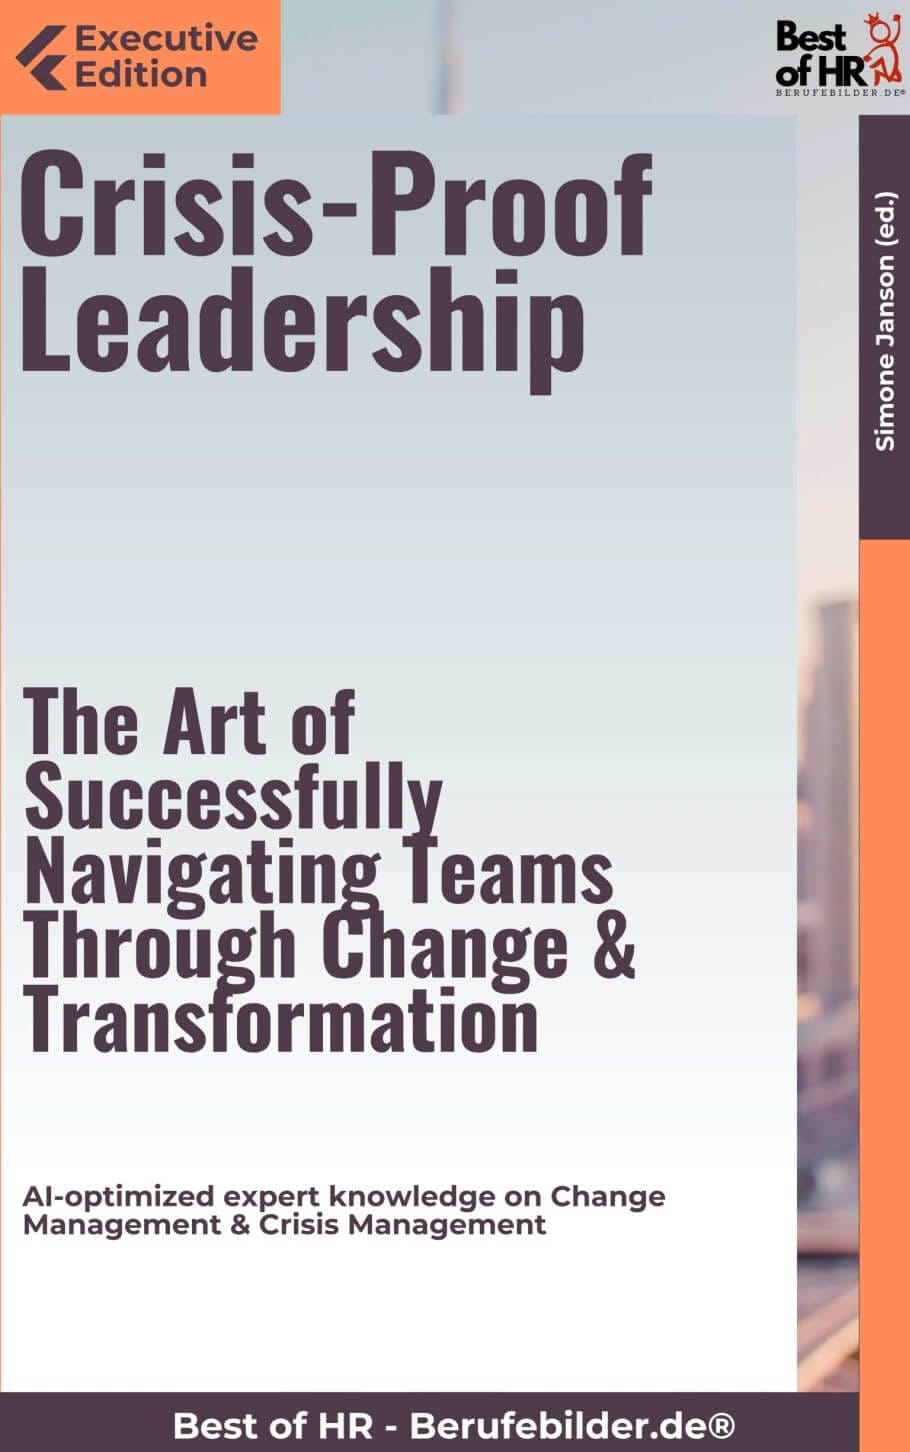 Crisis-Proof Leadership – The Art of Successfully Navigating Teams Through Change & Transformation (Engl. Version)